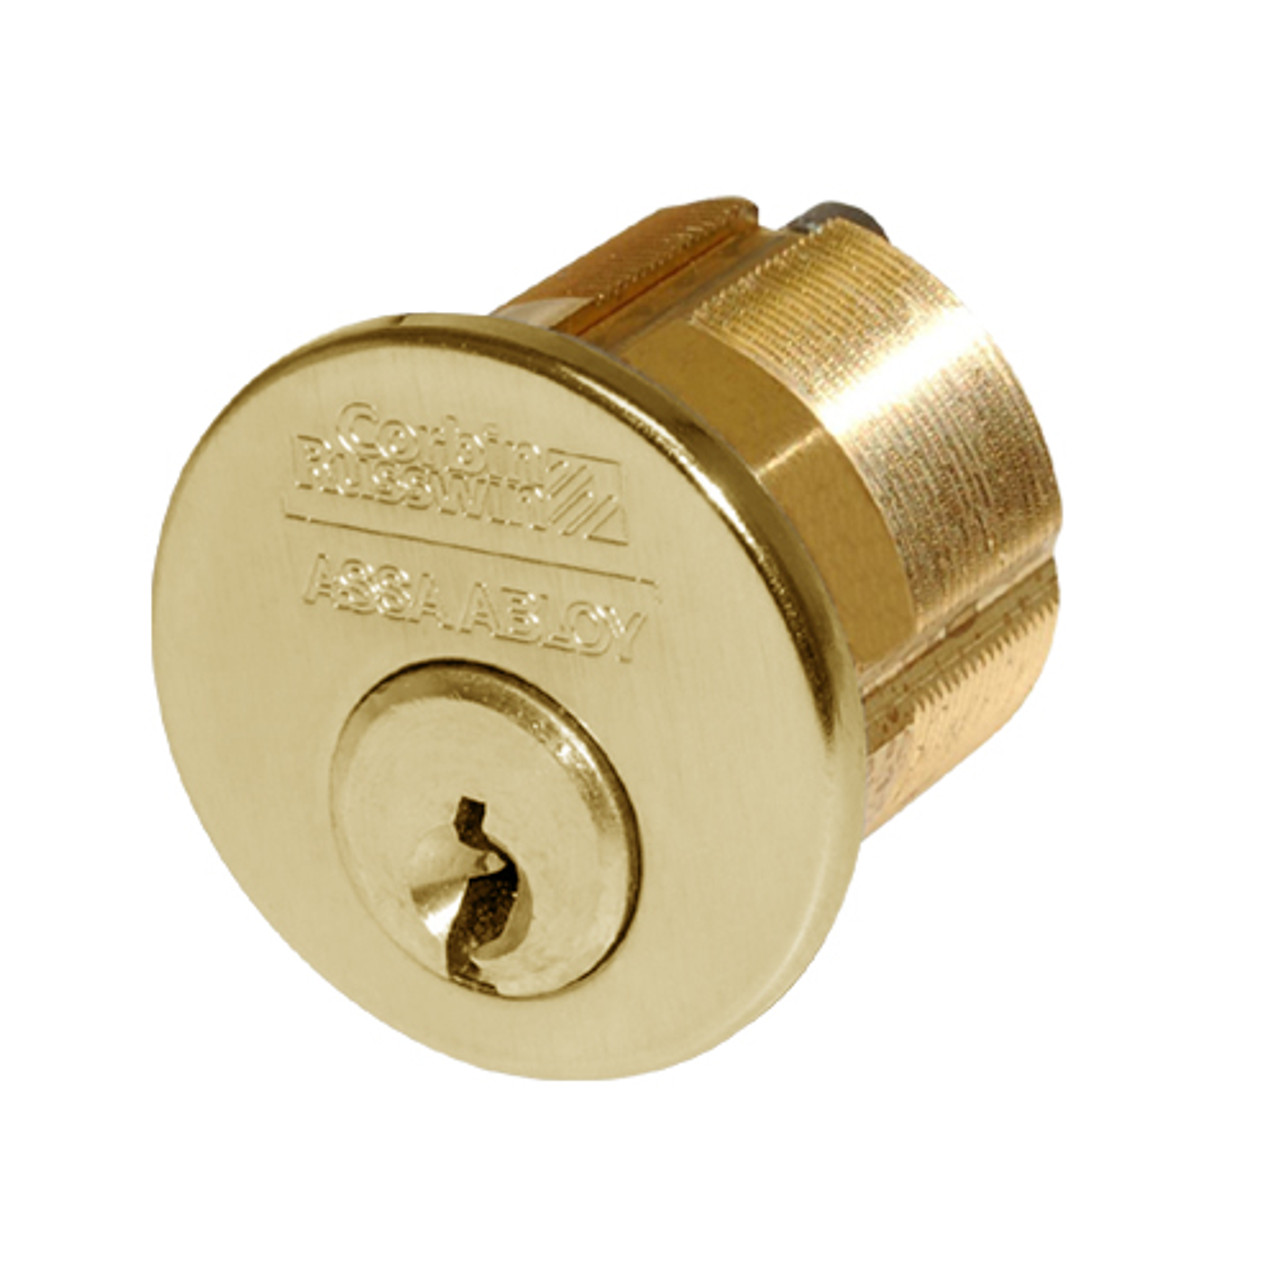 CR1000-134-A01-6-L1-605 Corbin Conventional Mortise Cylinder for Mortise Lock and DL3000 Deadlocks with Cloverleaf Cam in Bright Brass Finish